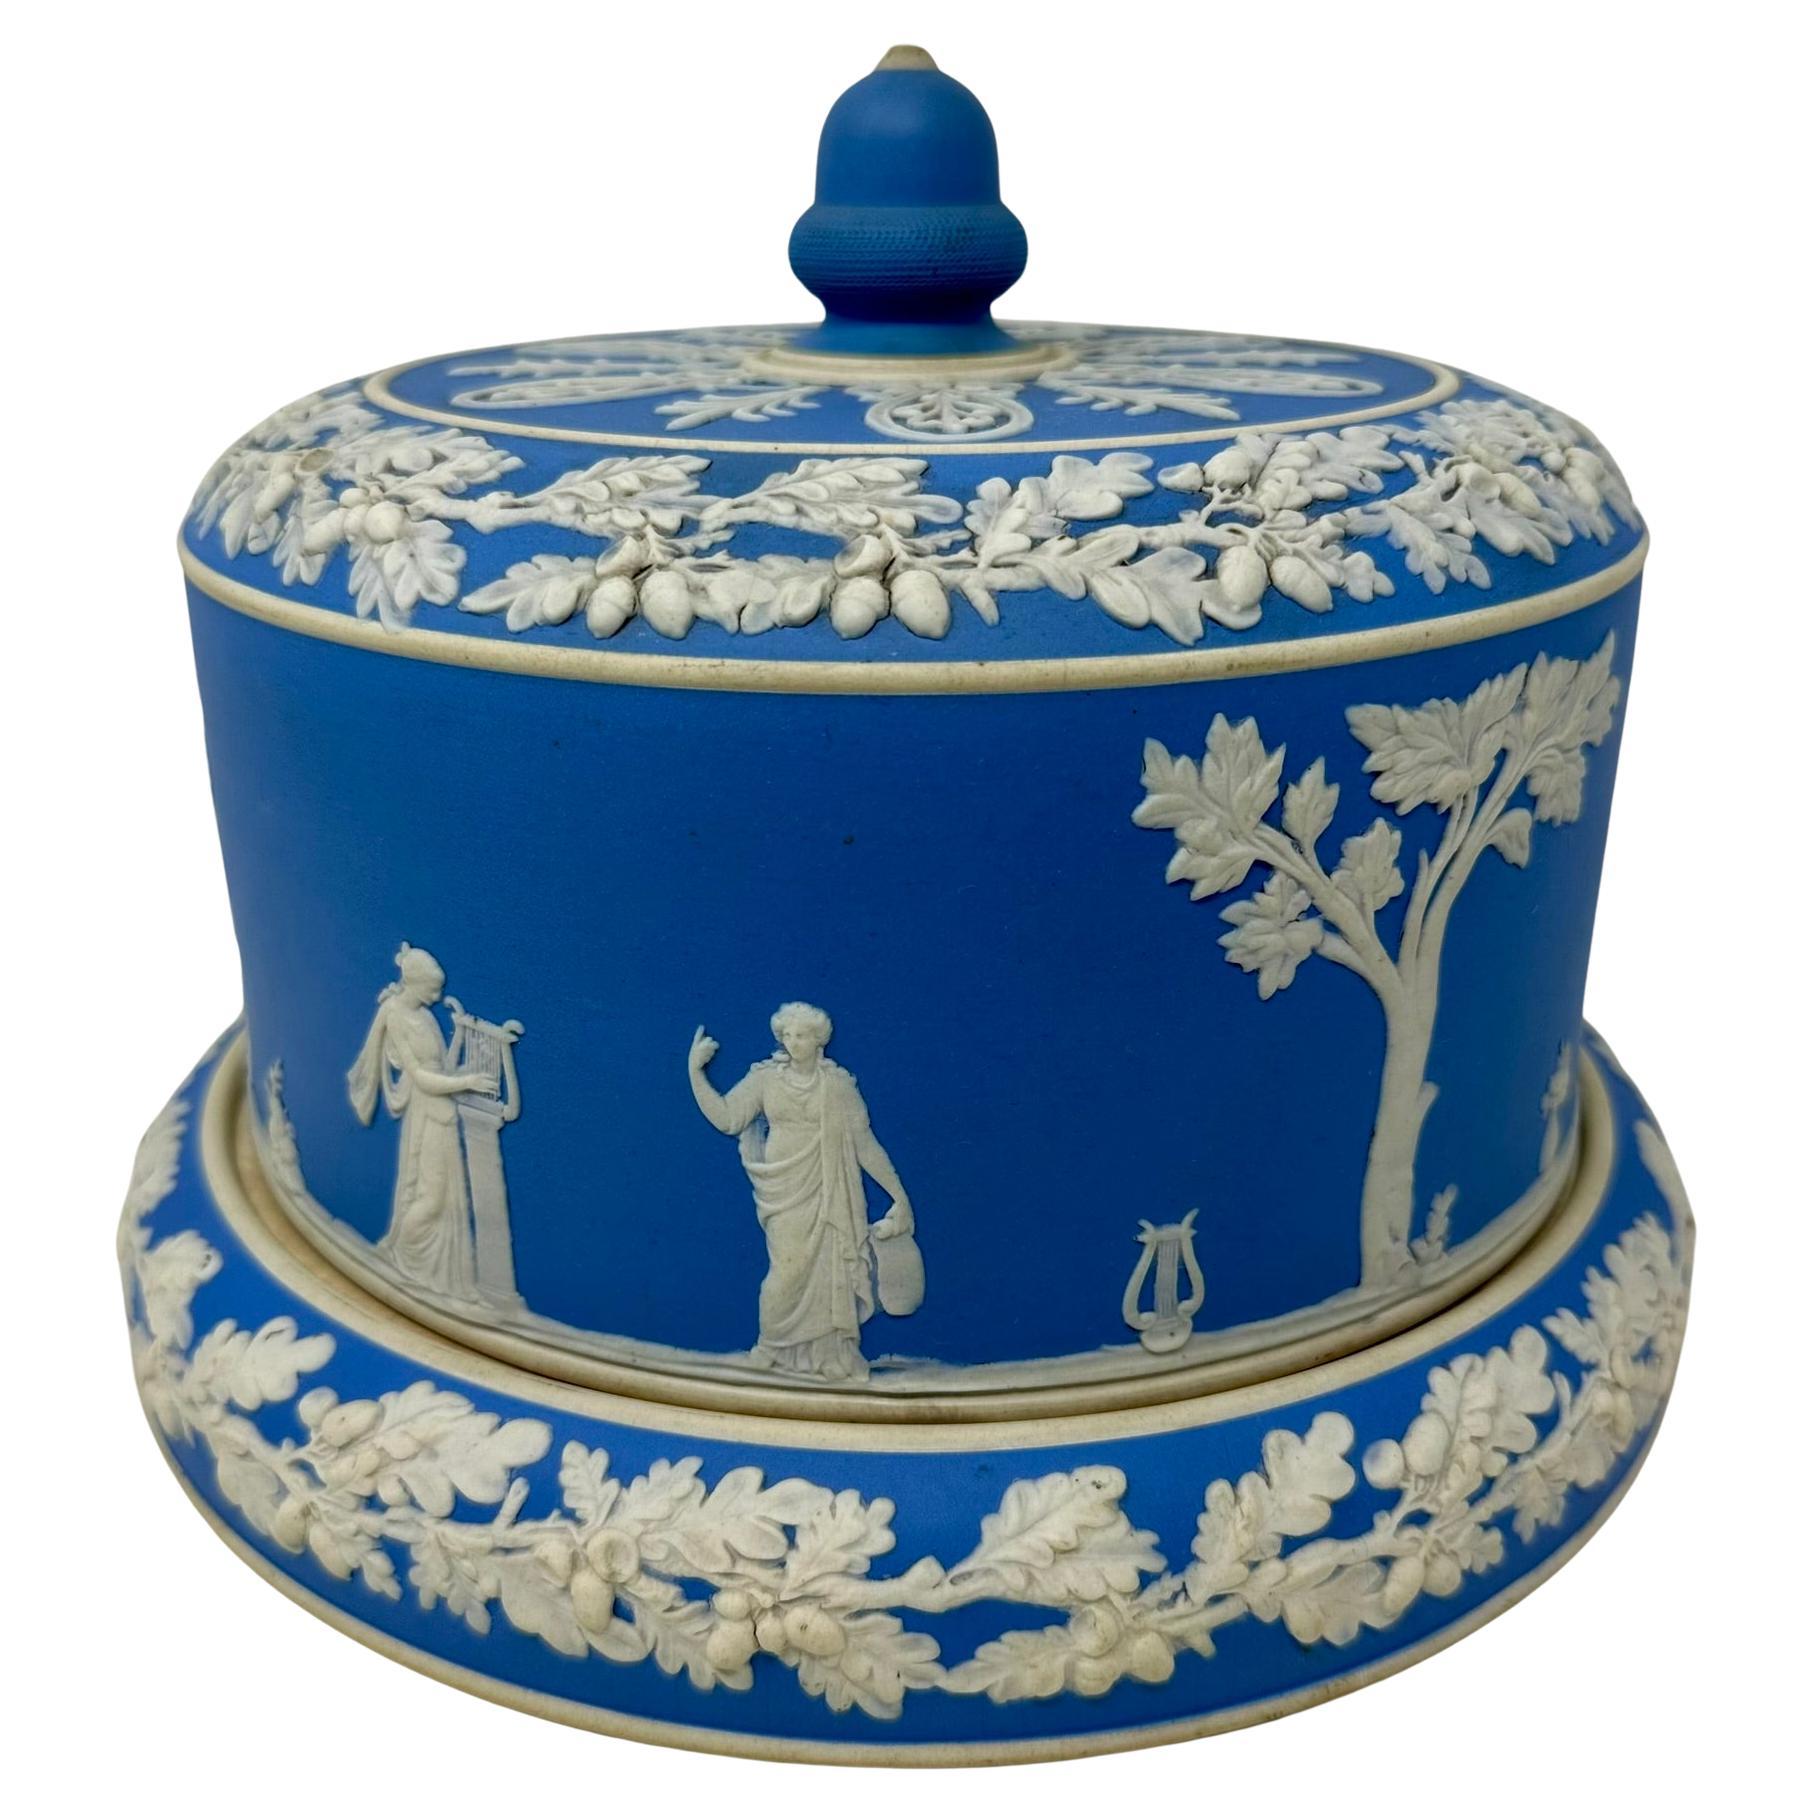 Antique English Wedgwood Jasperware Porcelain Cheese Dome & Cover, Circa 1900. For Sale